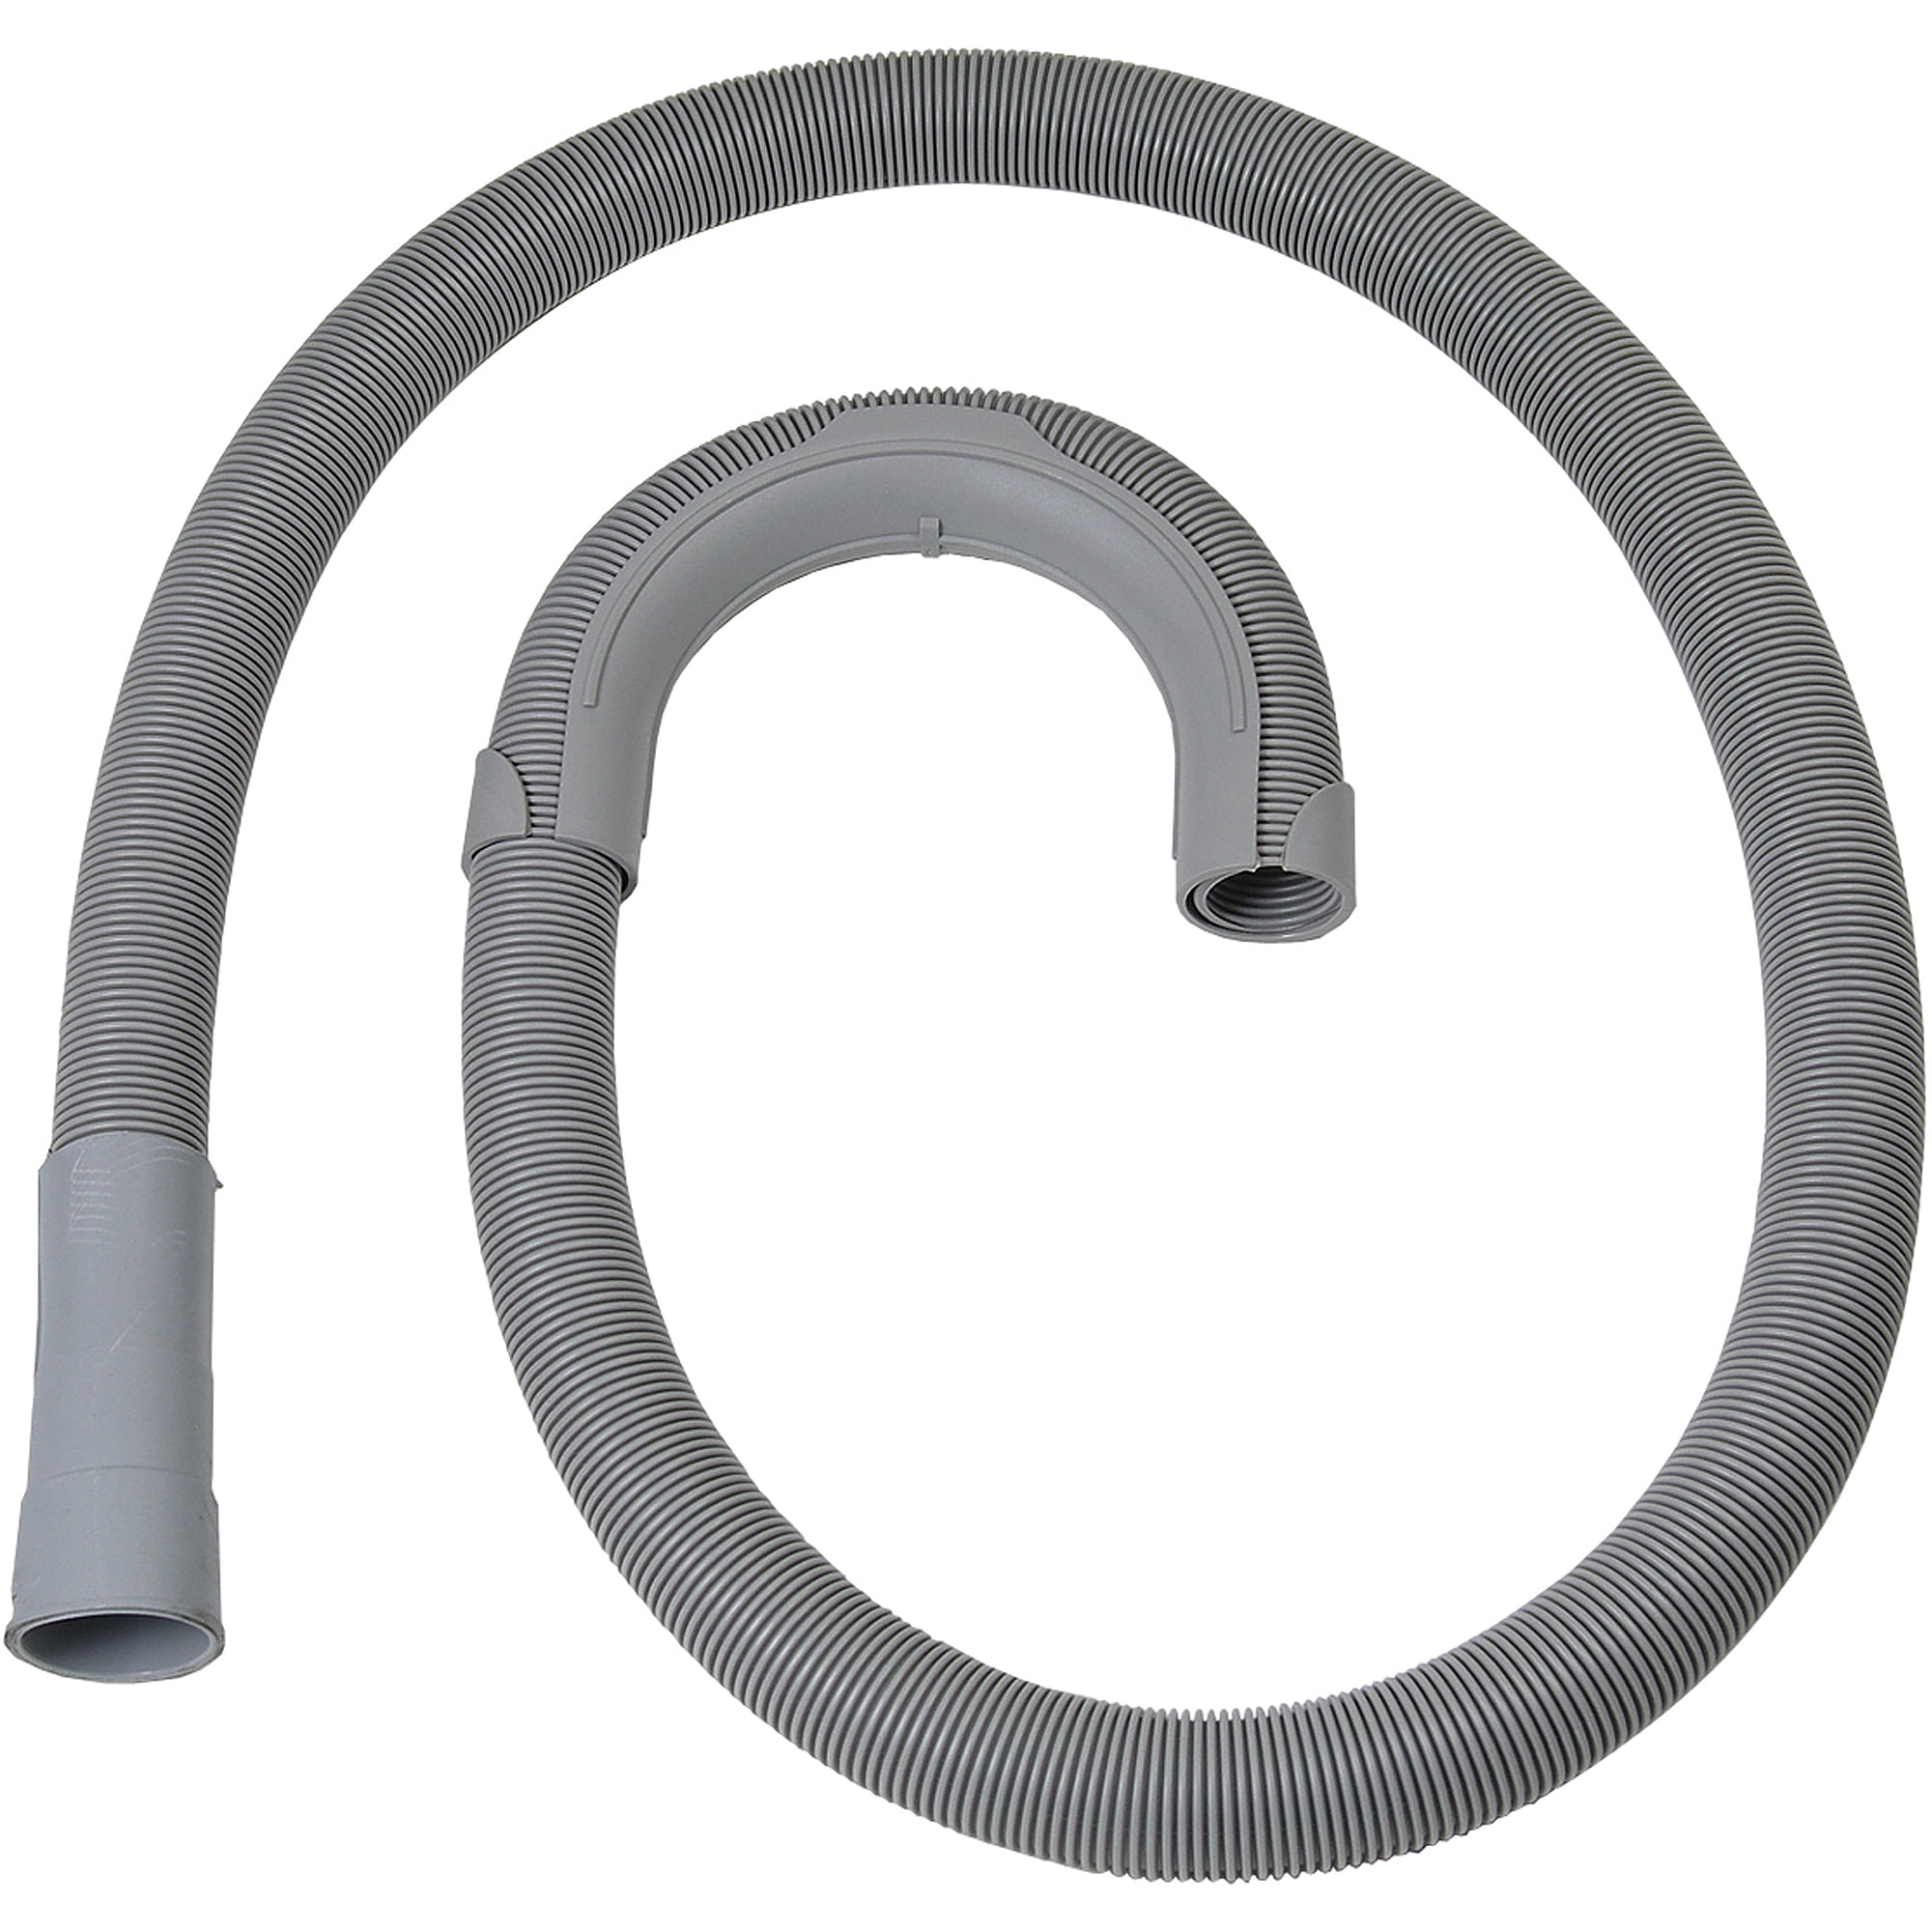 HOOVER Washing Machine Drain Hose Washer Dryer Outlet Water Pipe 4m 29 & 22mm 